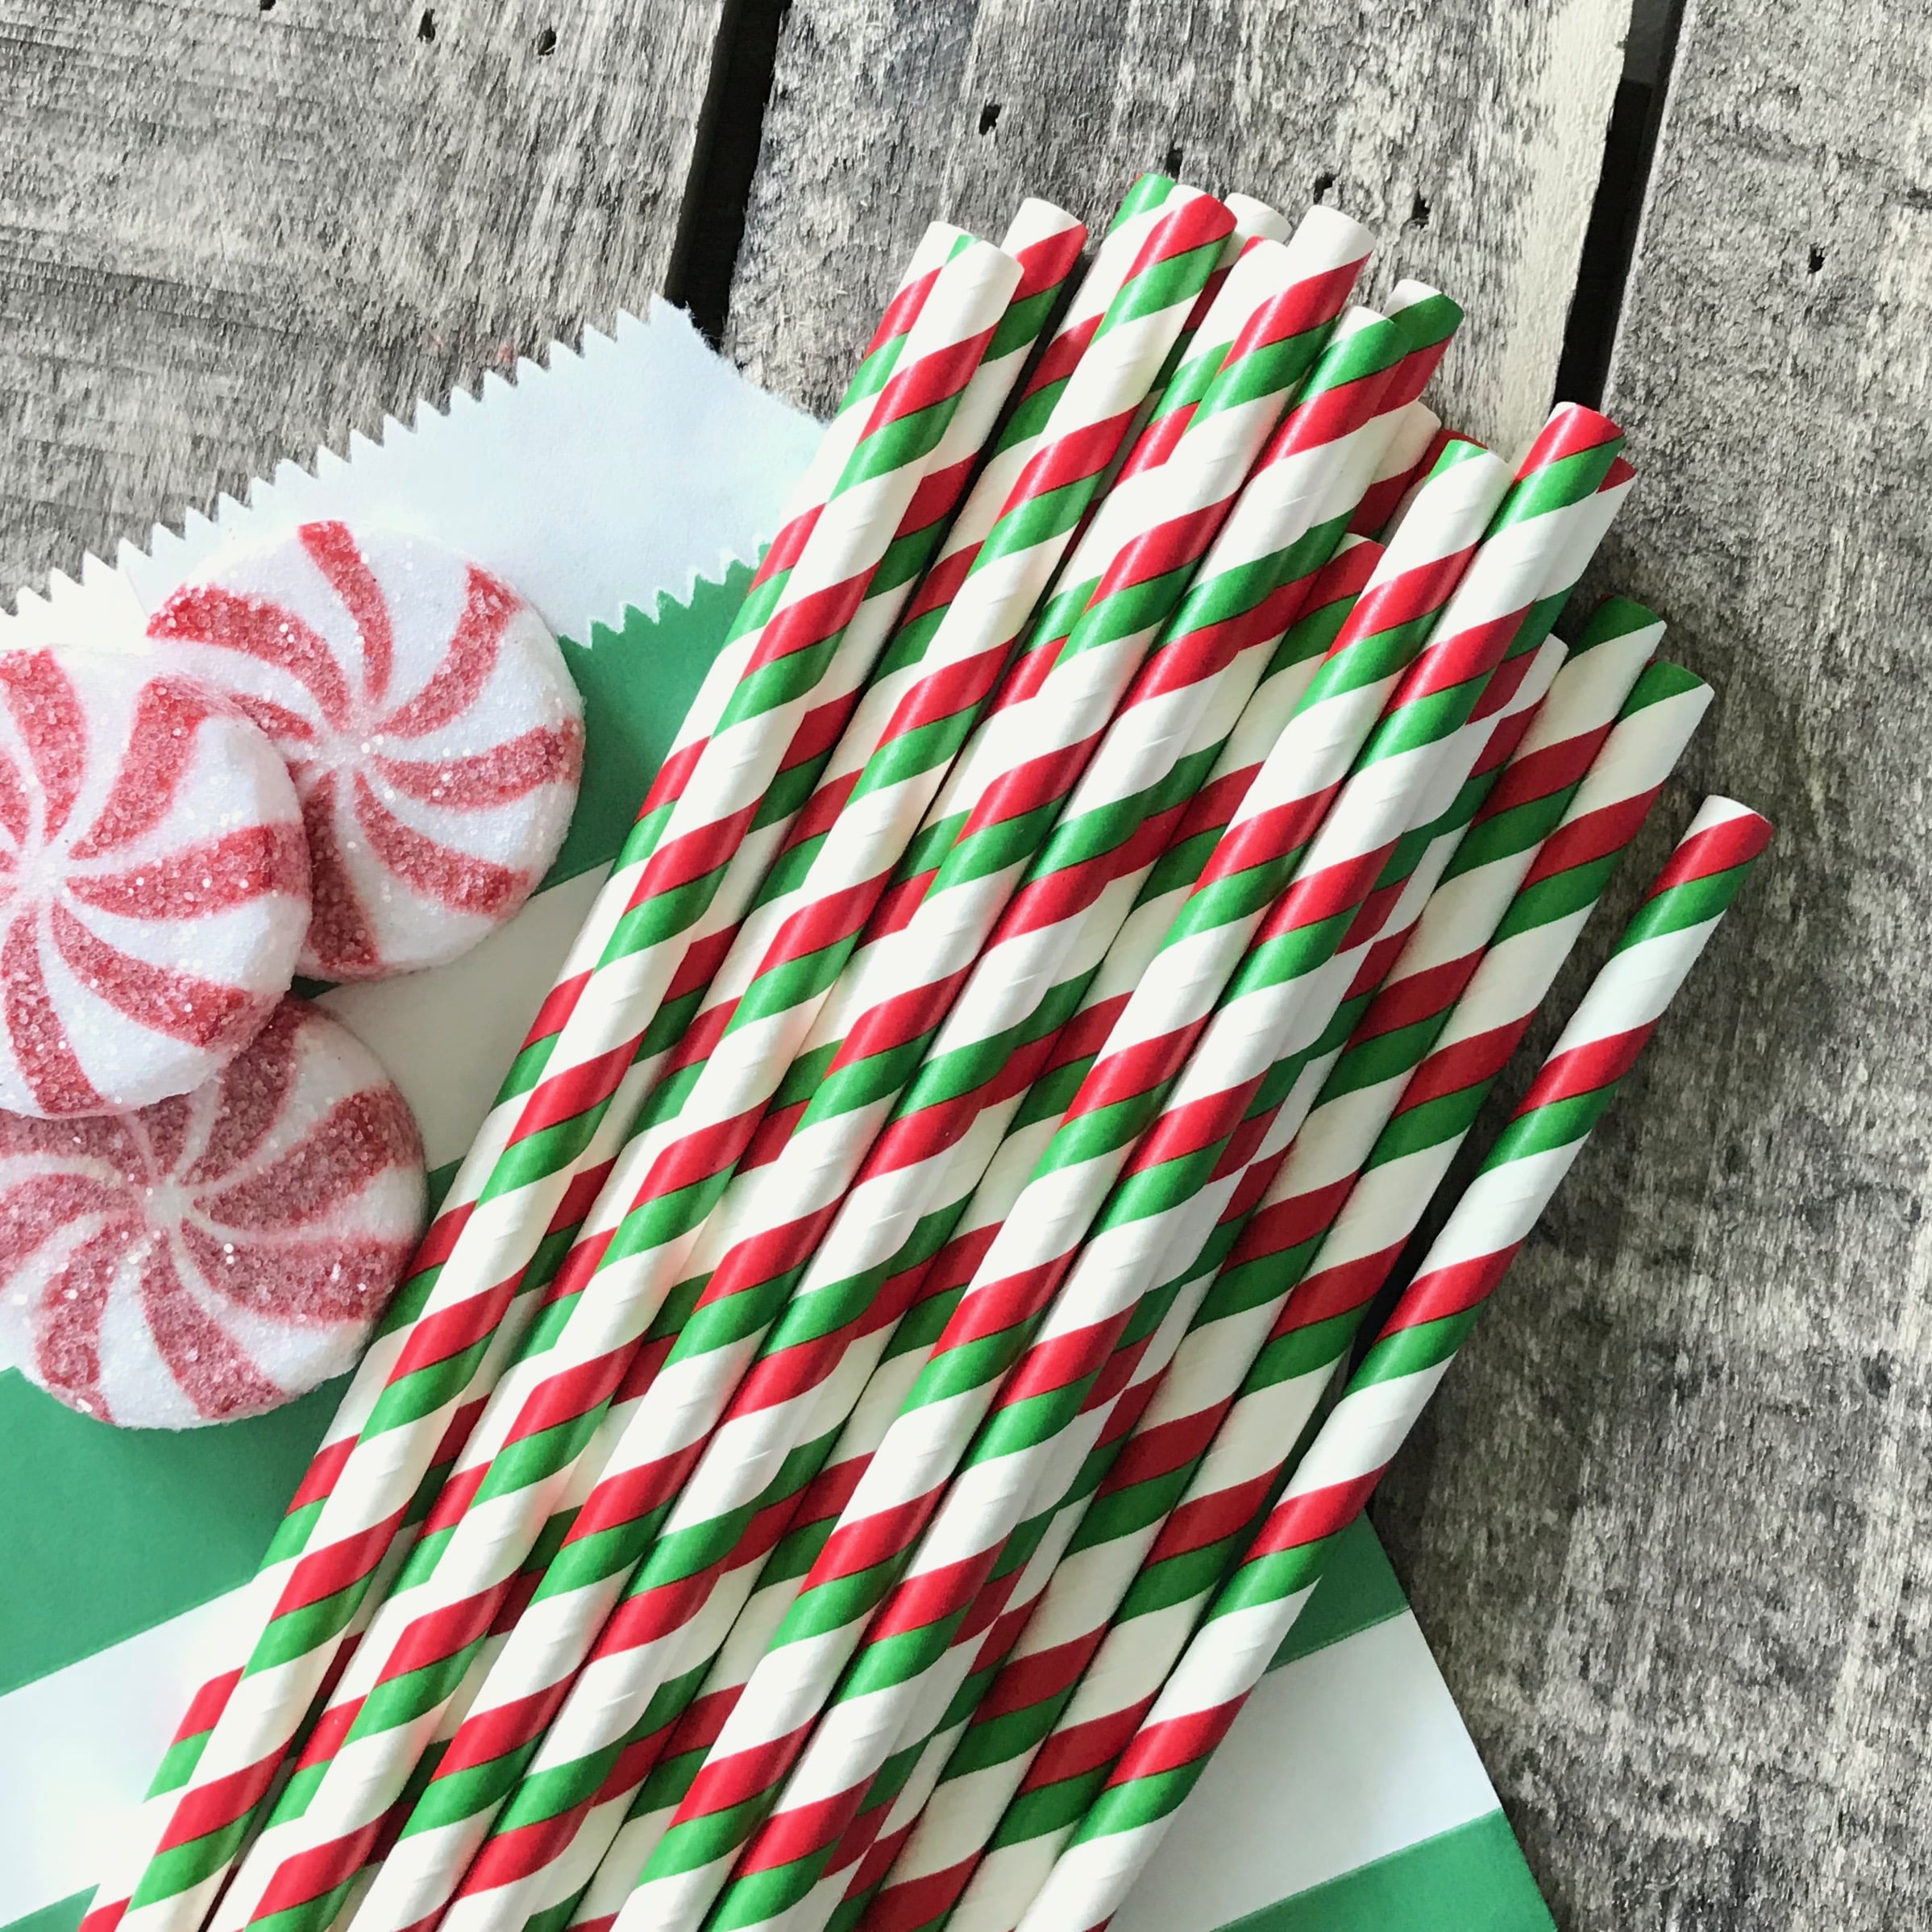 Liphontcta Pack of 150 Christmas Paper Straws in Red, Green and Gold.  Holiday Straws, Vintage Party Supplies, Santa Red & Emerald Elf Green Straws